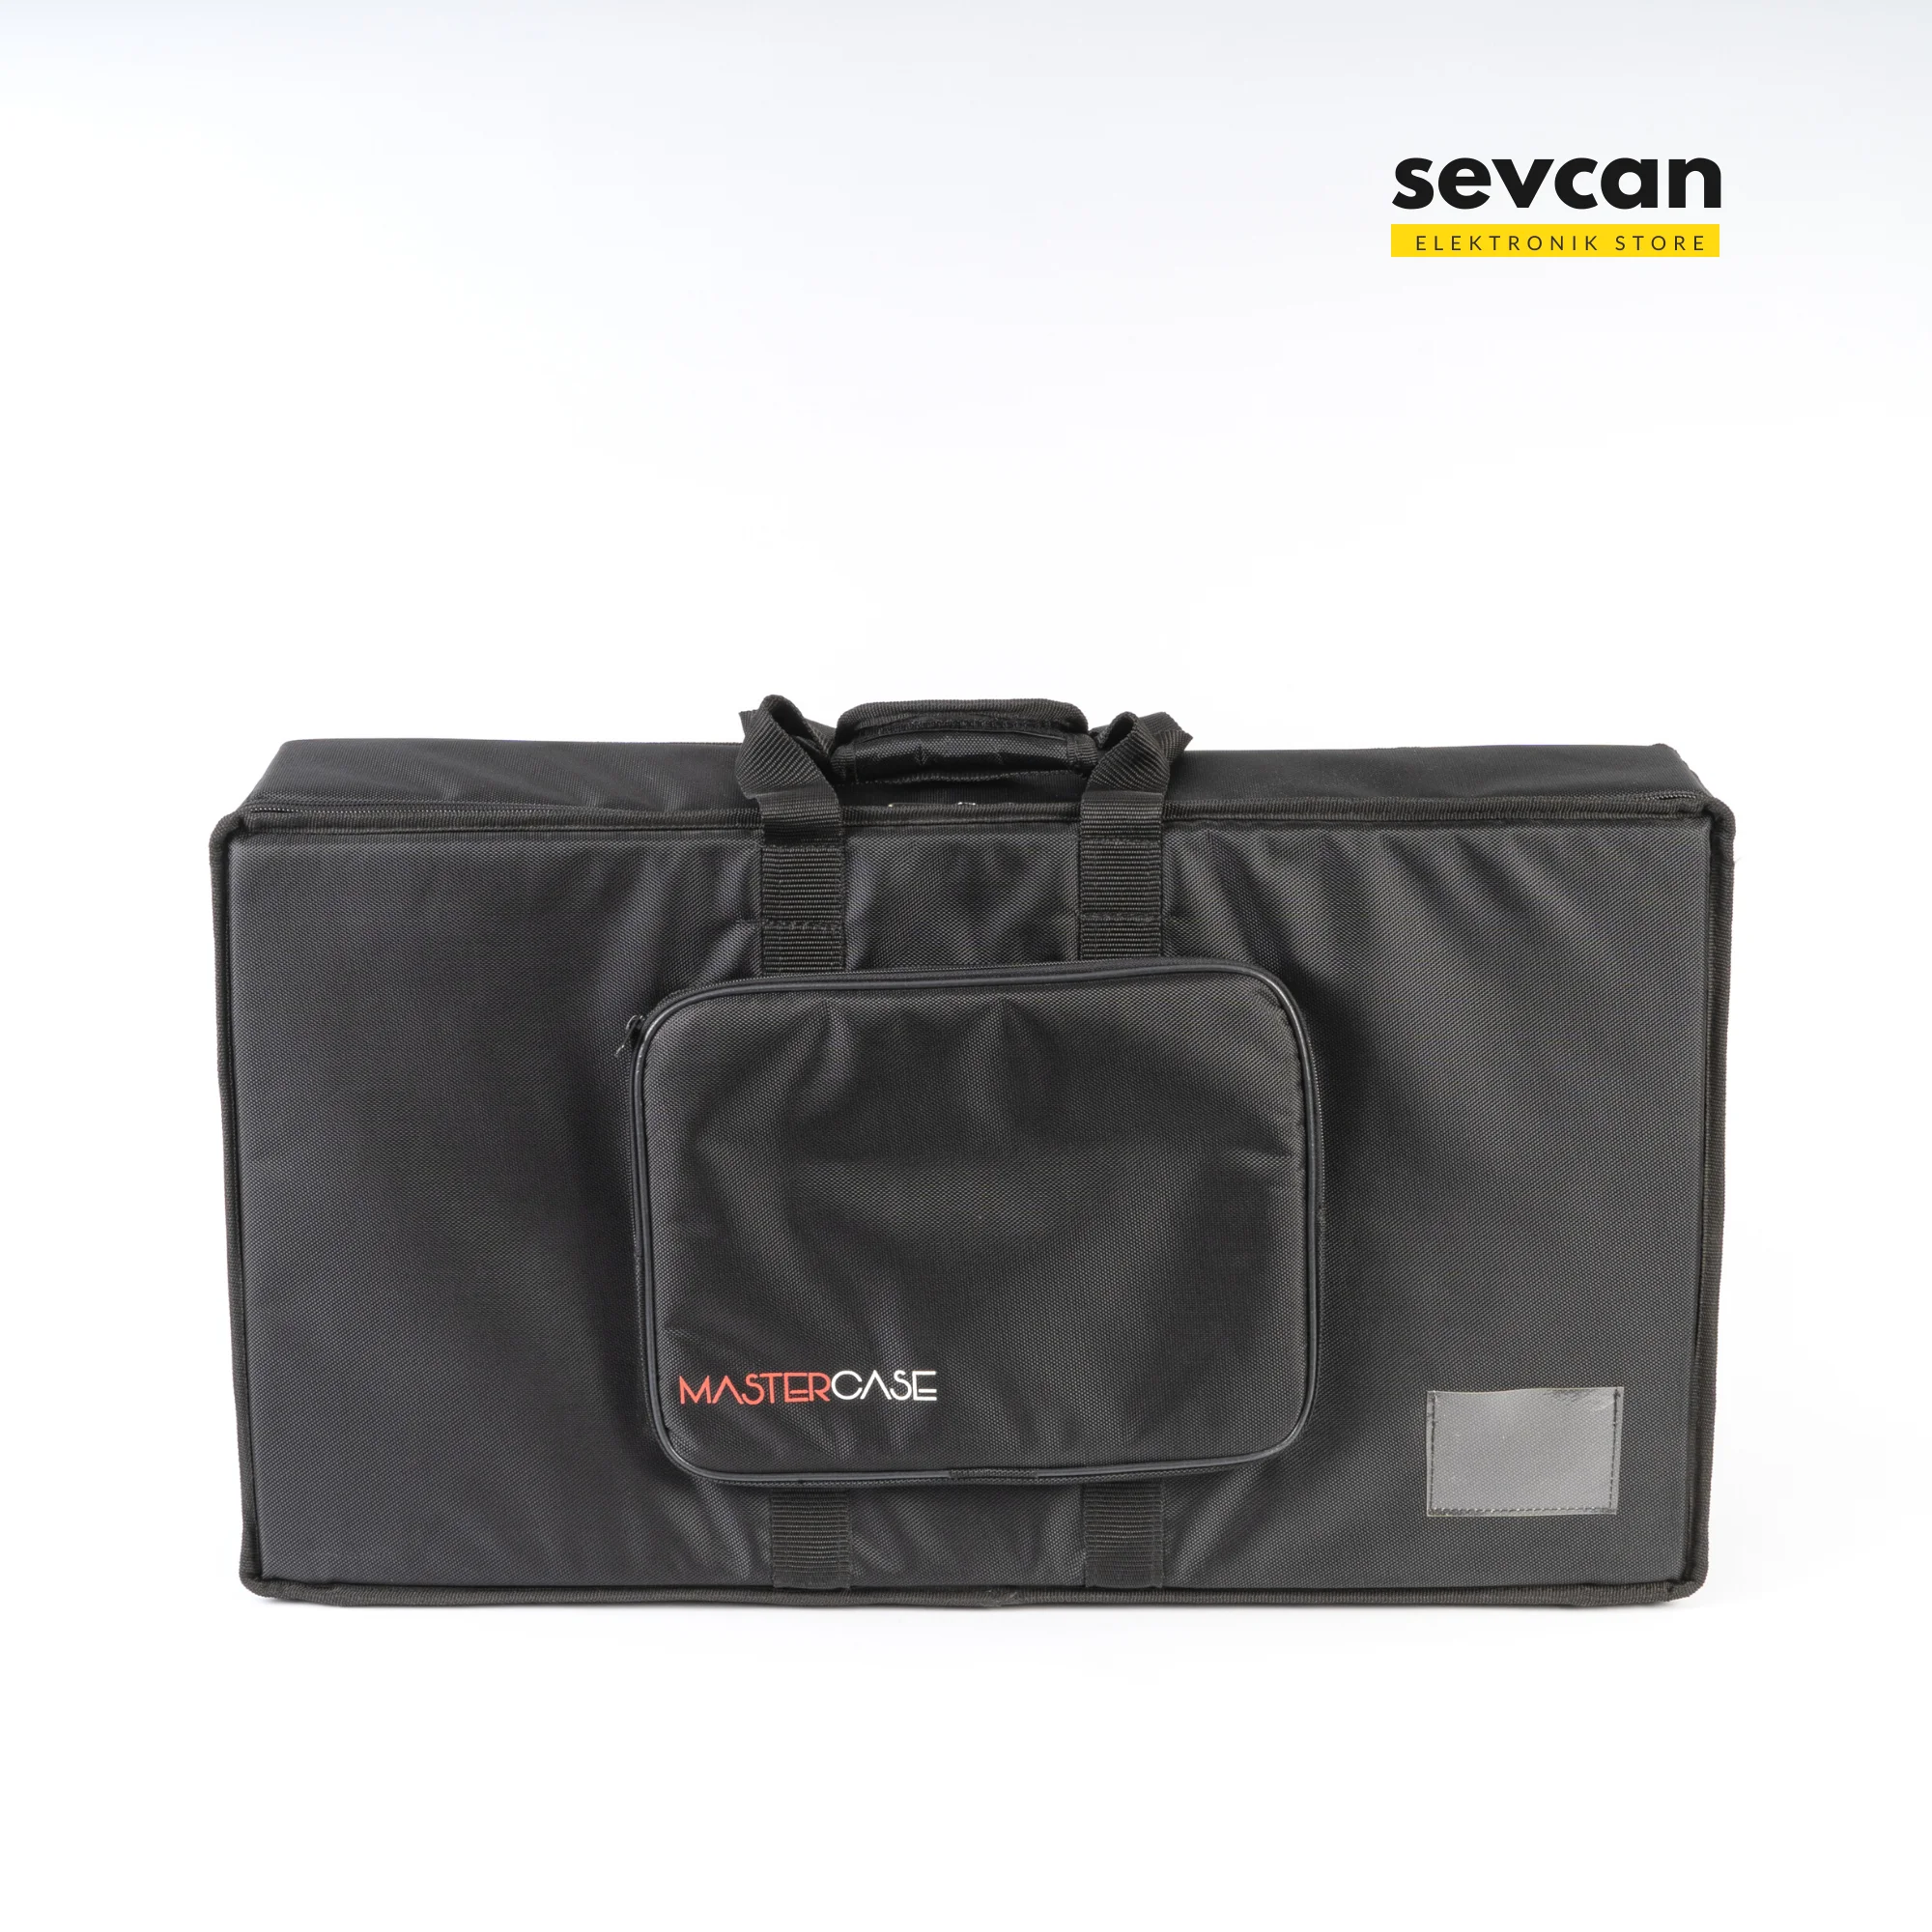 Professional Soft Case Carrying Protection Safety Instrument DJ Equipment Covering Bag MC10